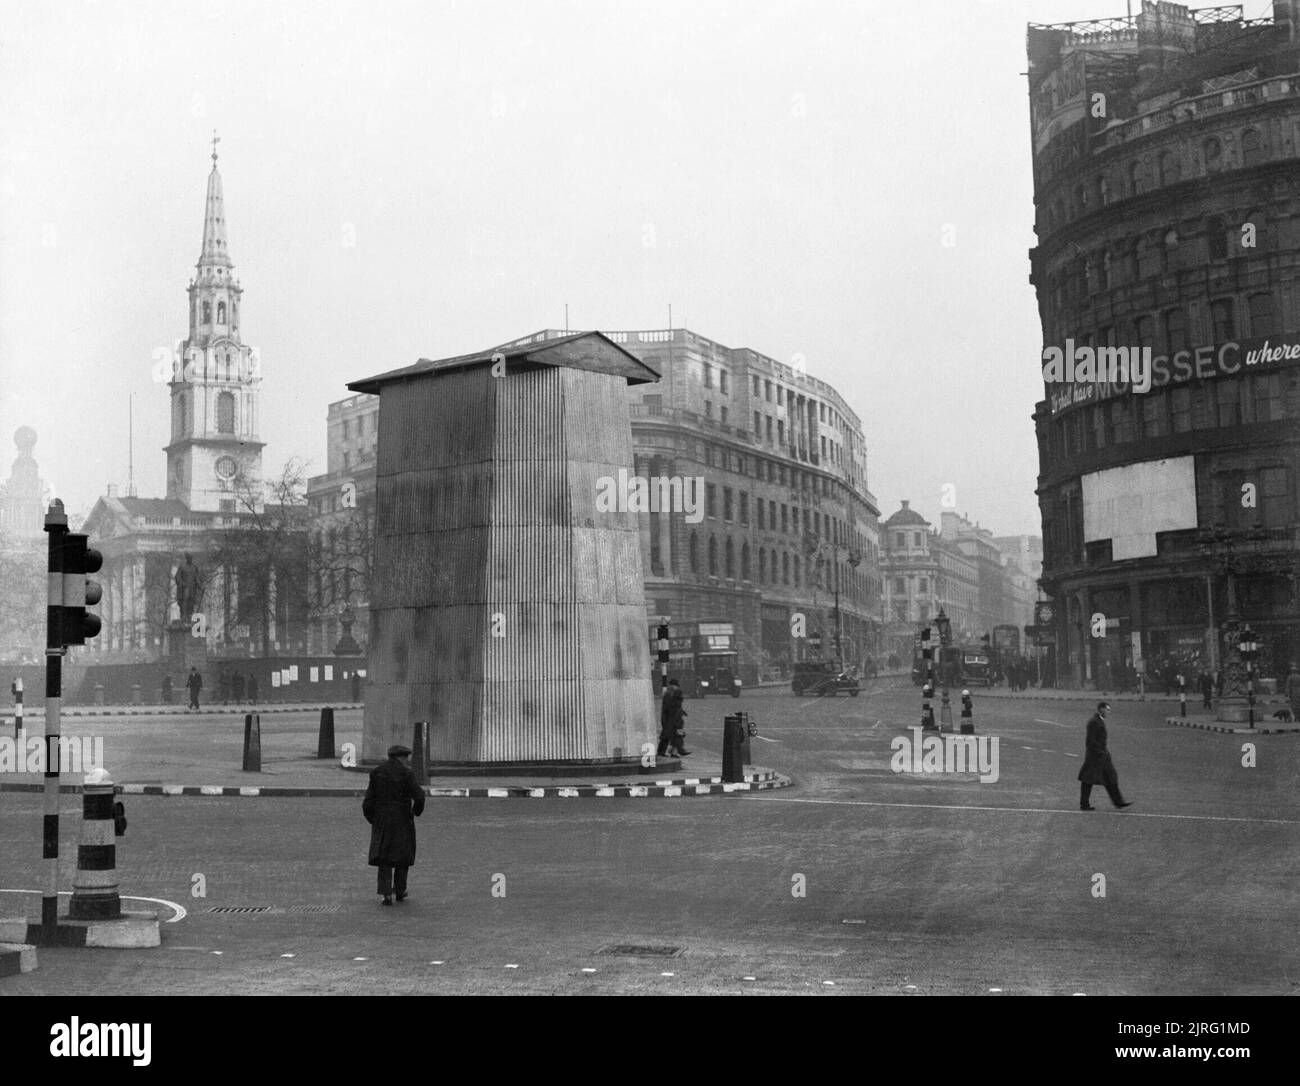 The corrugated metal structure erected to protect the statue of King Charles I in Trafalgar Square, London, 1939. The corrugated metal structure erected to protect the statue of King Charles I in Trafalgar Square, London, 1939. Stock Photo